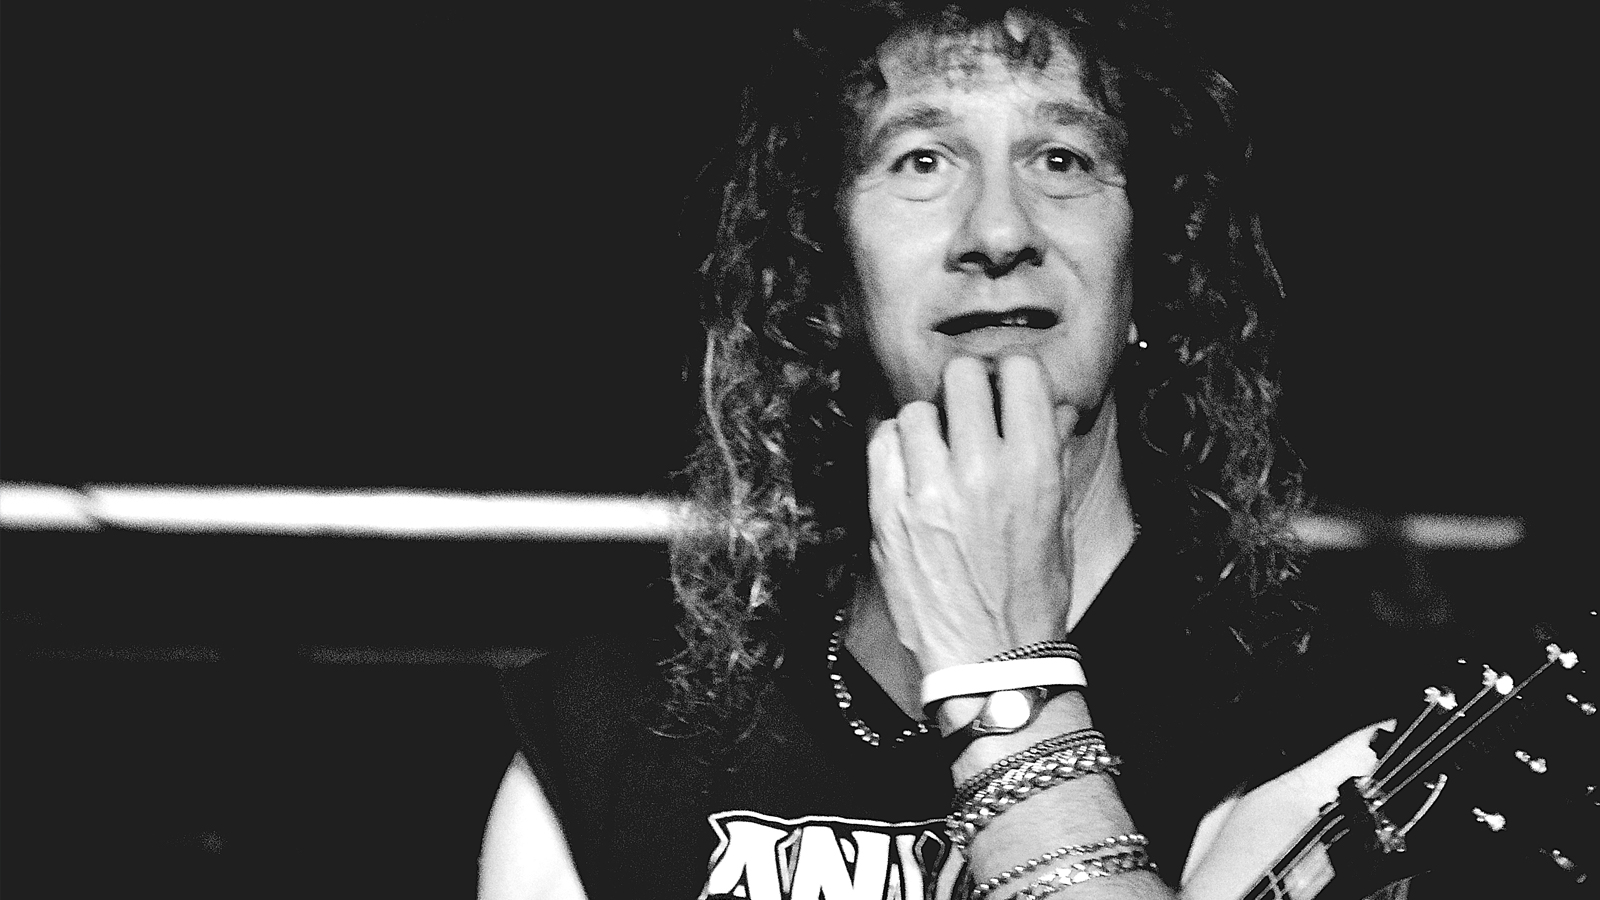 Steven Barry ‘Lips’ Kudlow, the guitarist and lead vocalist of Anvil at the Headbangers Open Air Festival 2014, Brande-Hörnerkirchen, Germany.